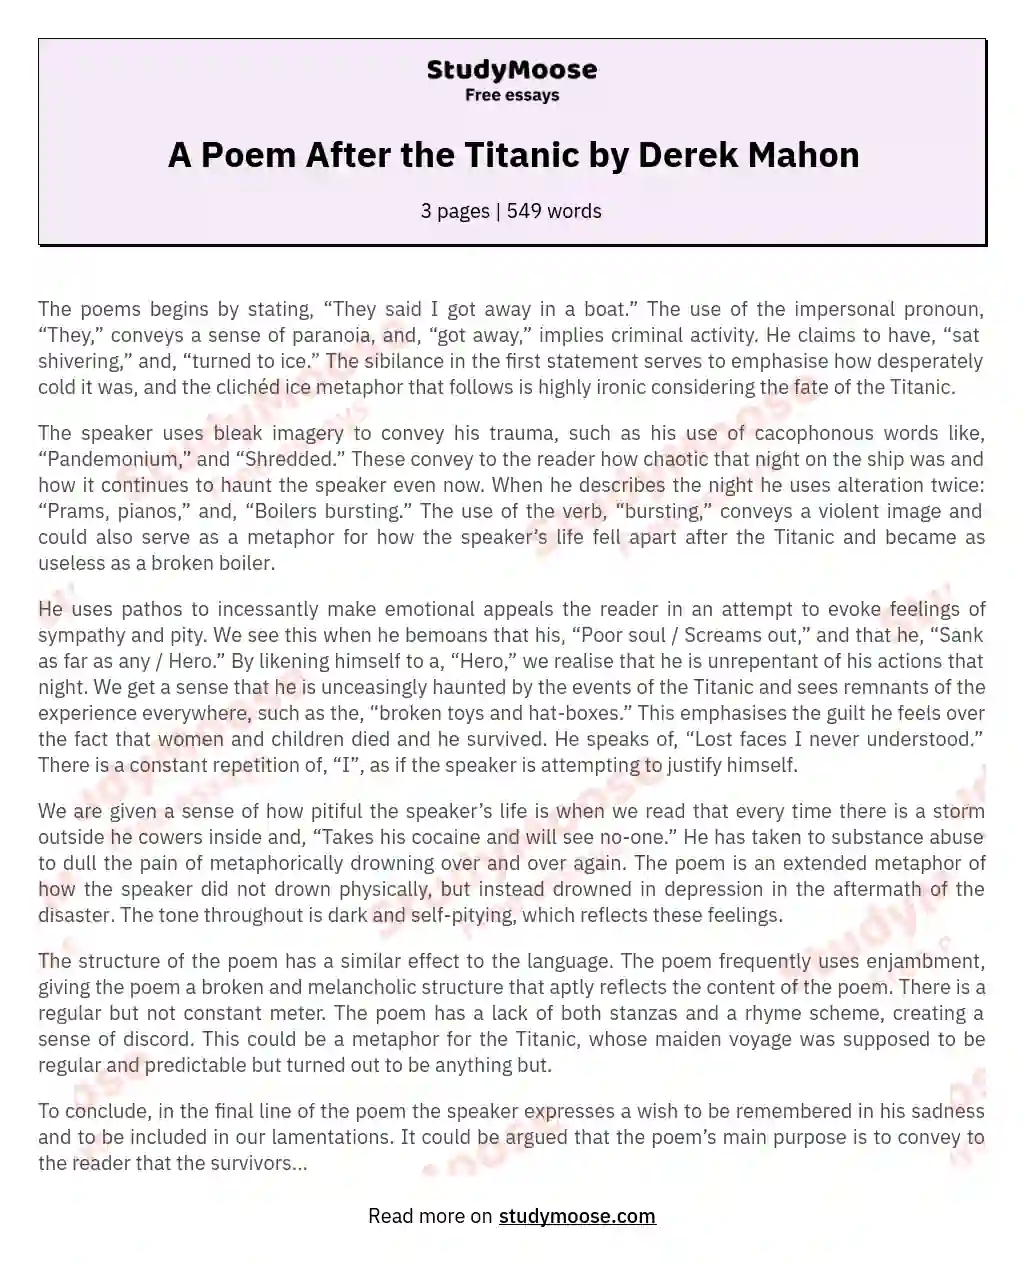 A Poem After the Titanic by Derek Mahon essay